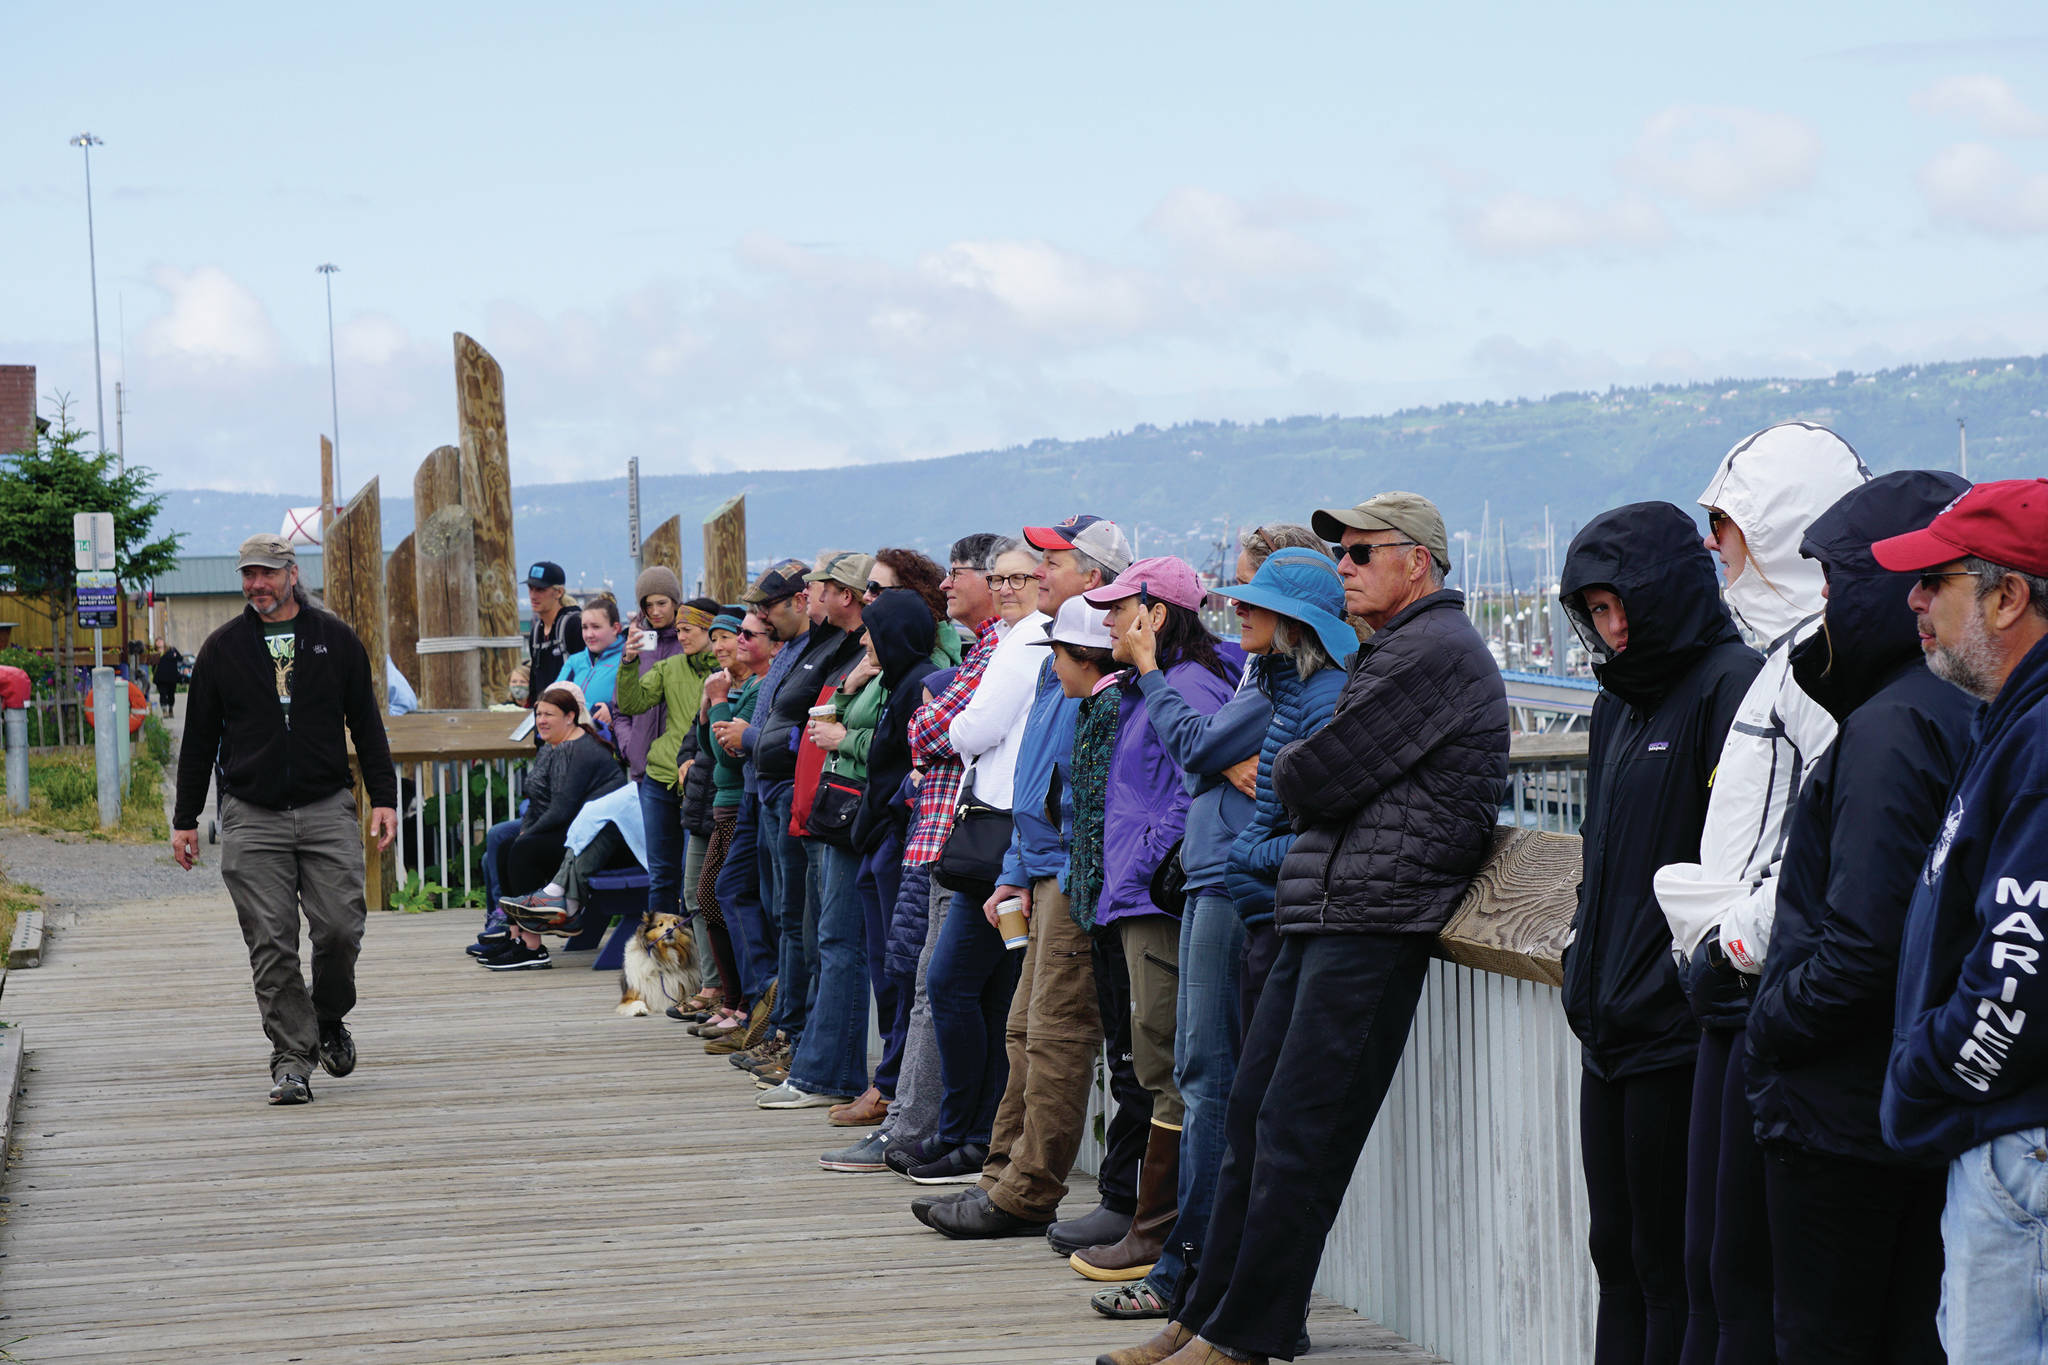 A standing-room only crowd listens to the Yale University Whiffenpoofs perform in a concert Thursday, July 8, 2021, at the Boathouse Pavillion in Homer, Alaska. (Photo by Michael Armstrong/Homer News)